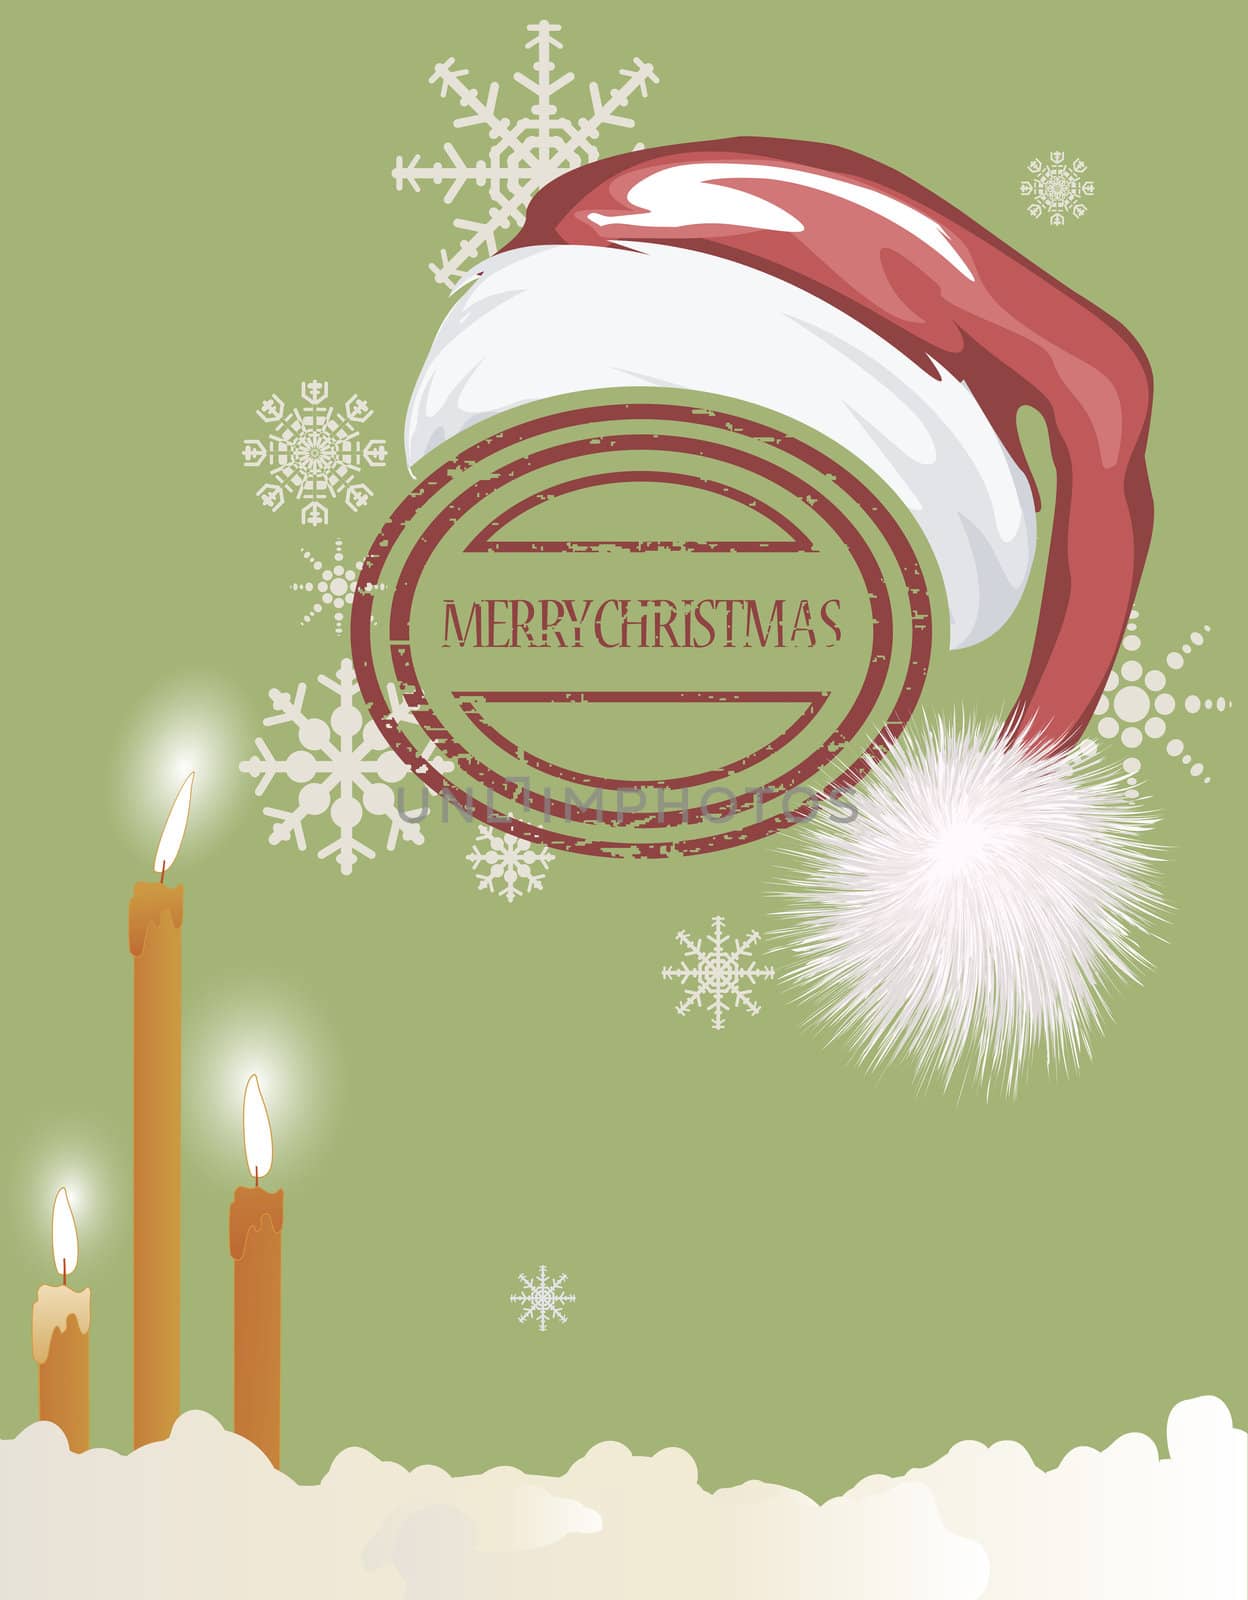 Happy Christmas card with room for text